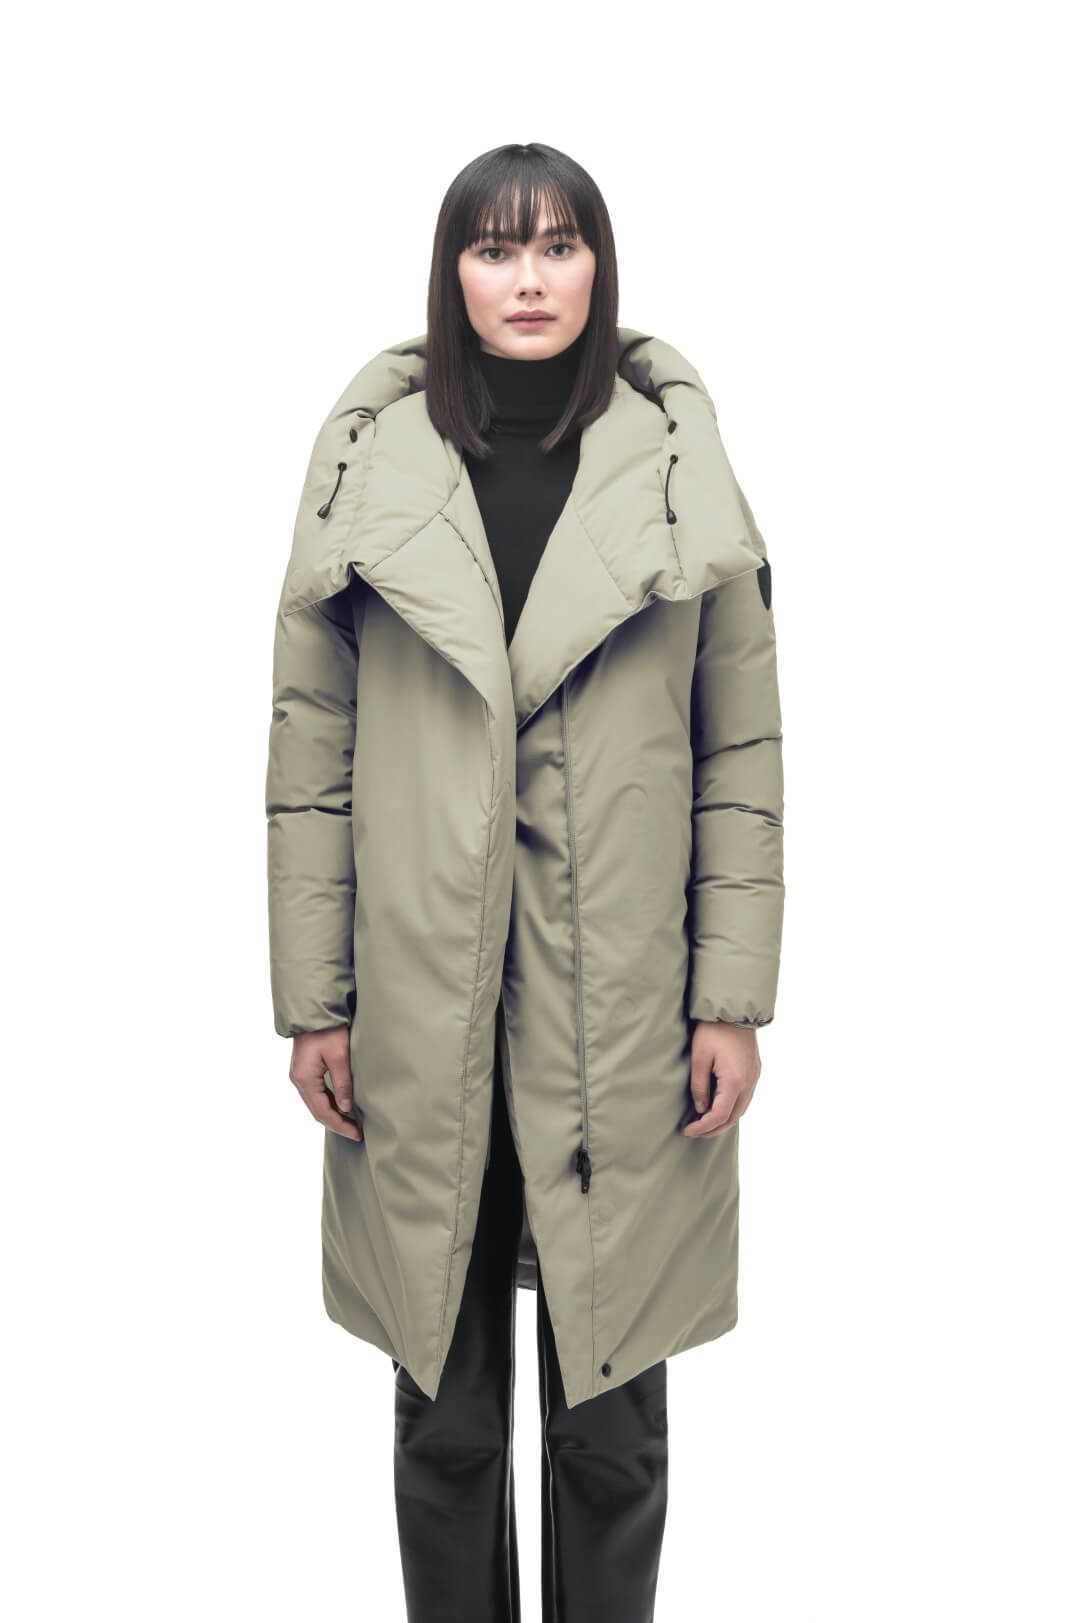 Axis Ladies Oversized Coat in knee length, Canadian duck down insulation, and two-way front zipper, in Tea